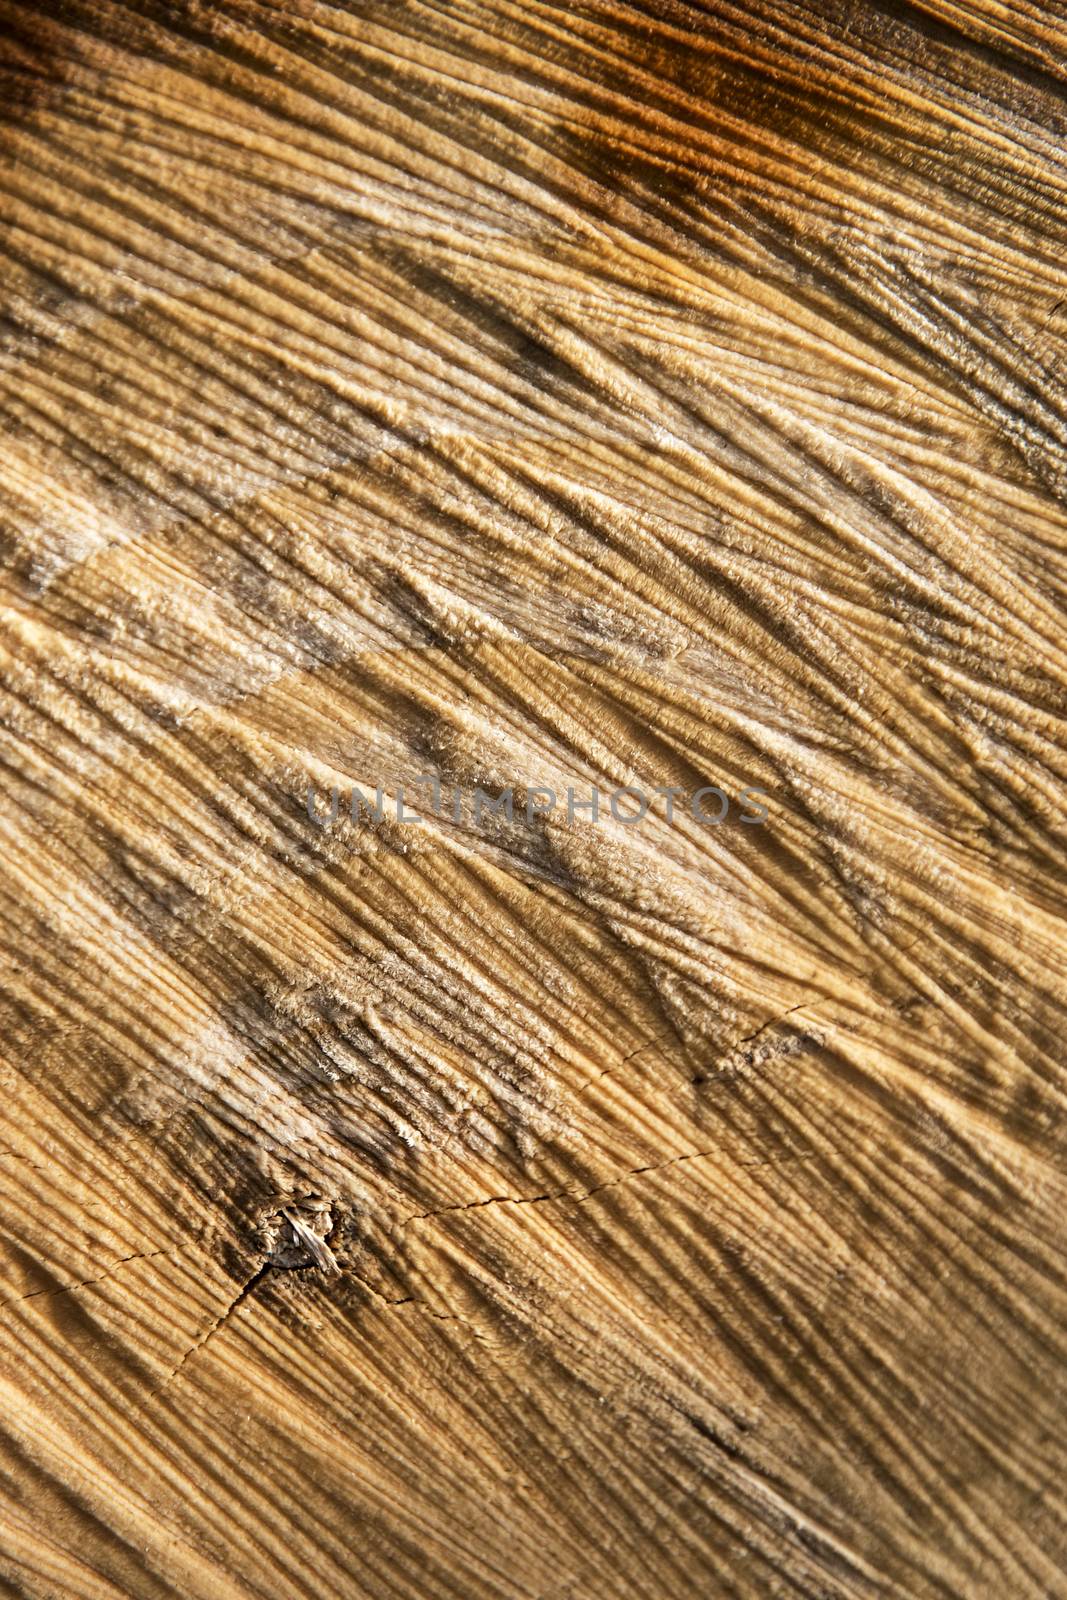 background or texture abstract grooves for cutting wood